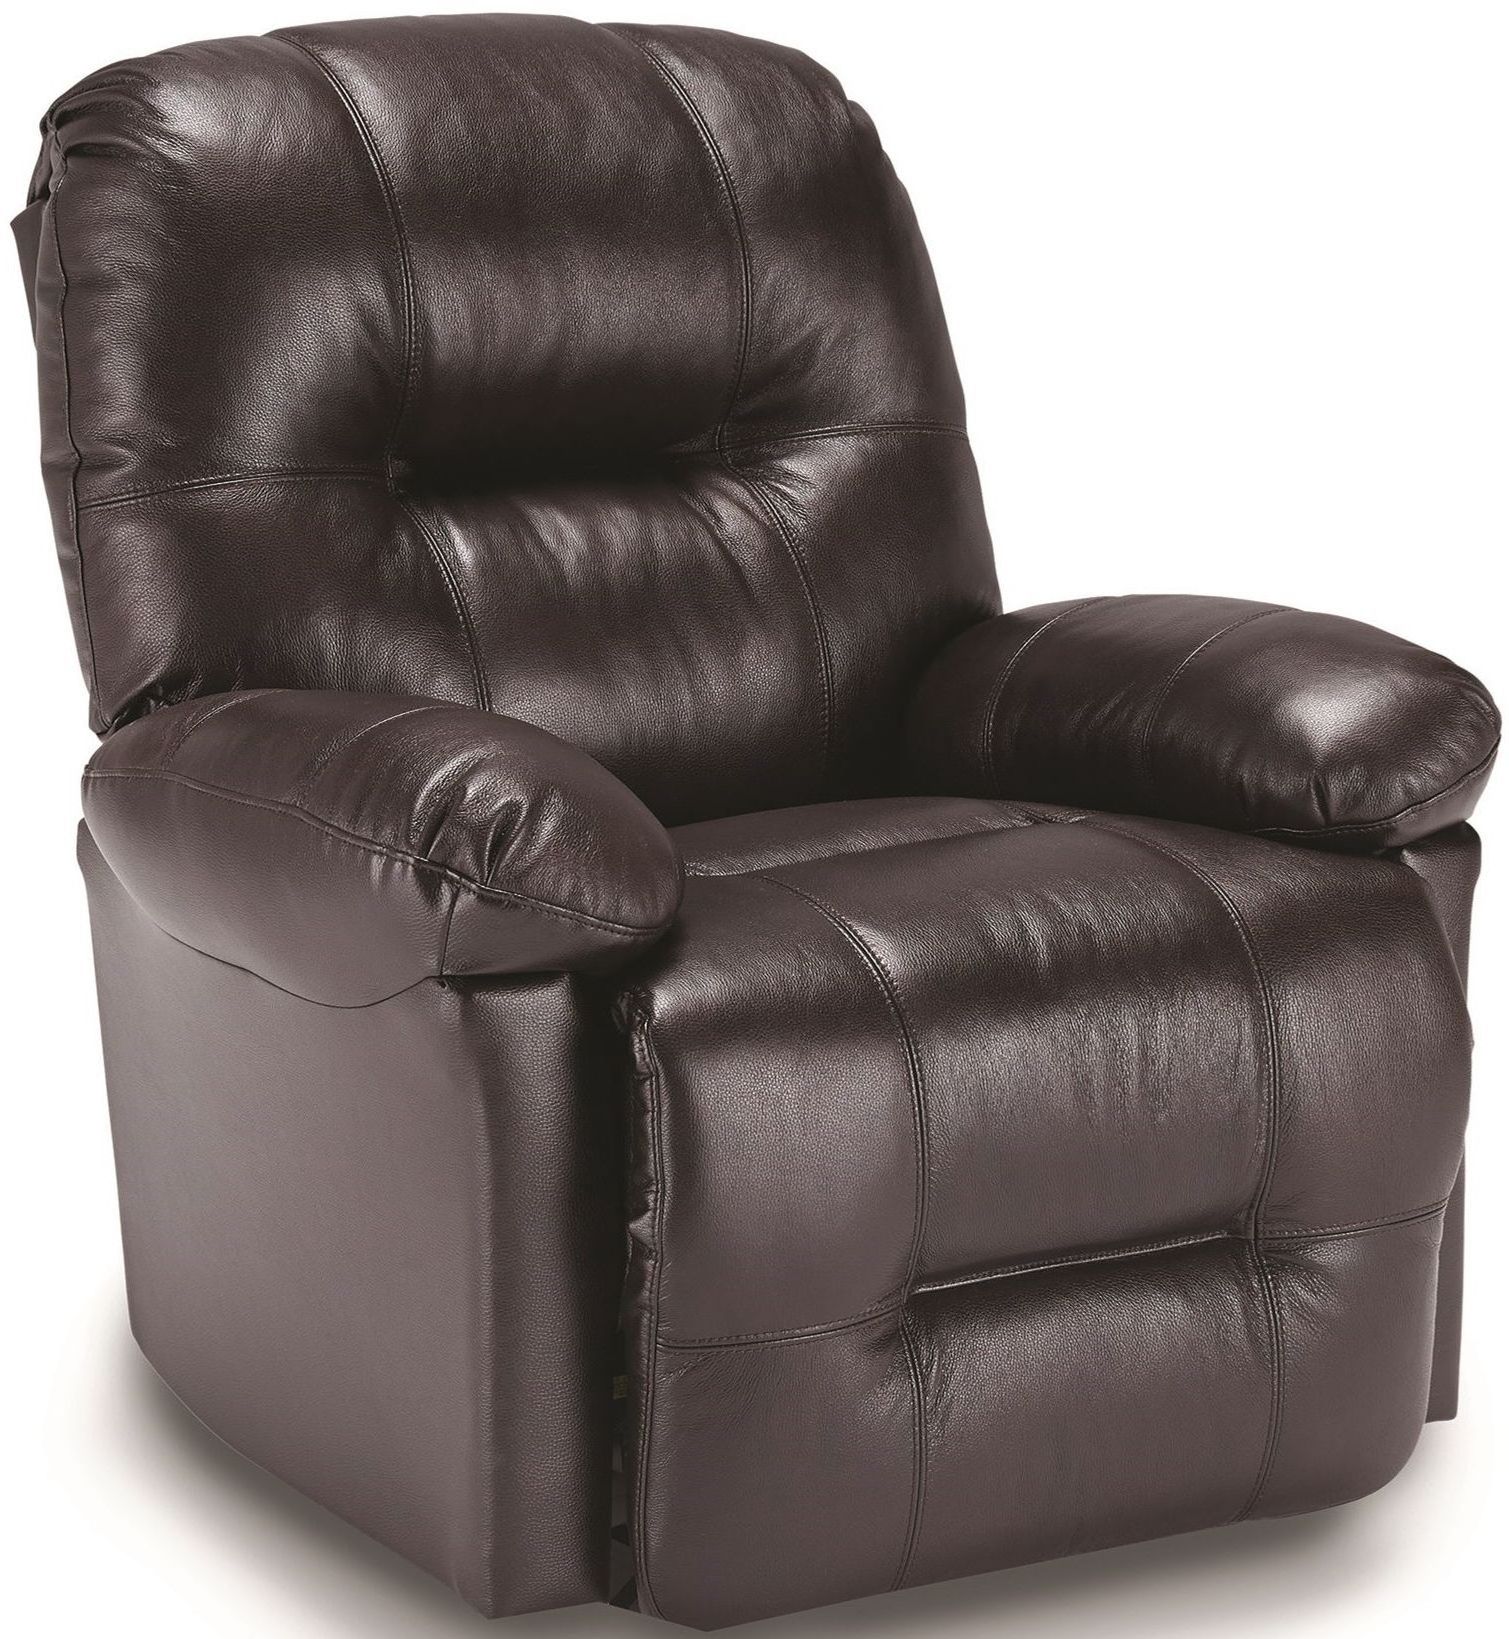 Best® Home Furnishings Zaynah Power Space Saver Recliner